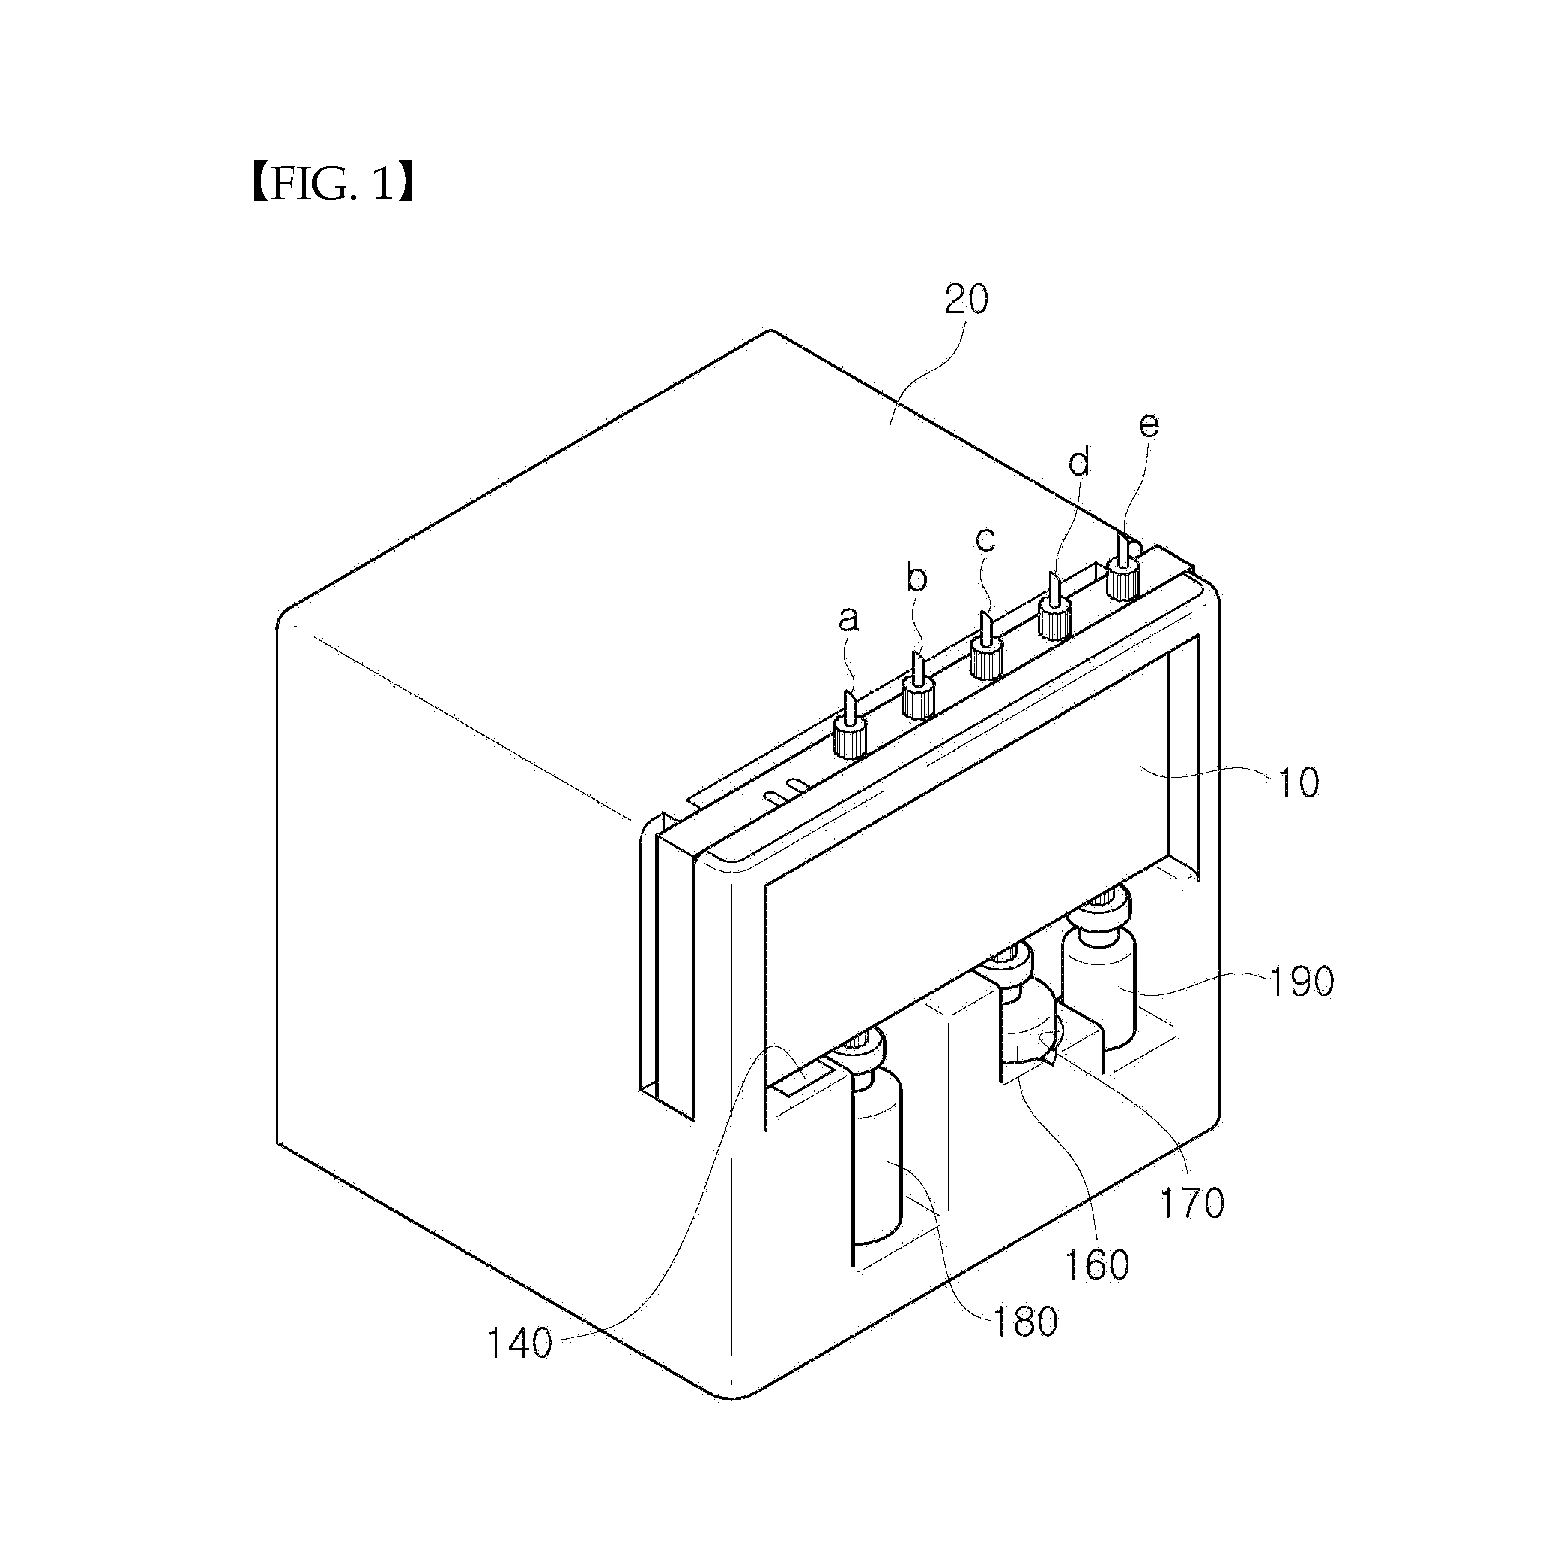 Apparatus and method for synthesizing f-18 labeled radioactive pharmaceuticals